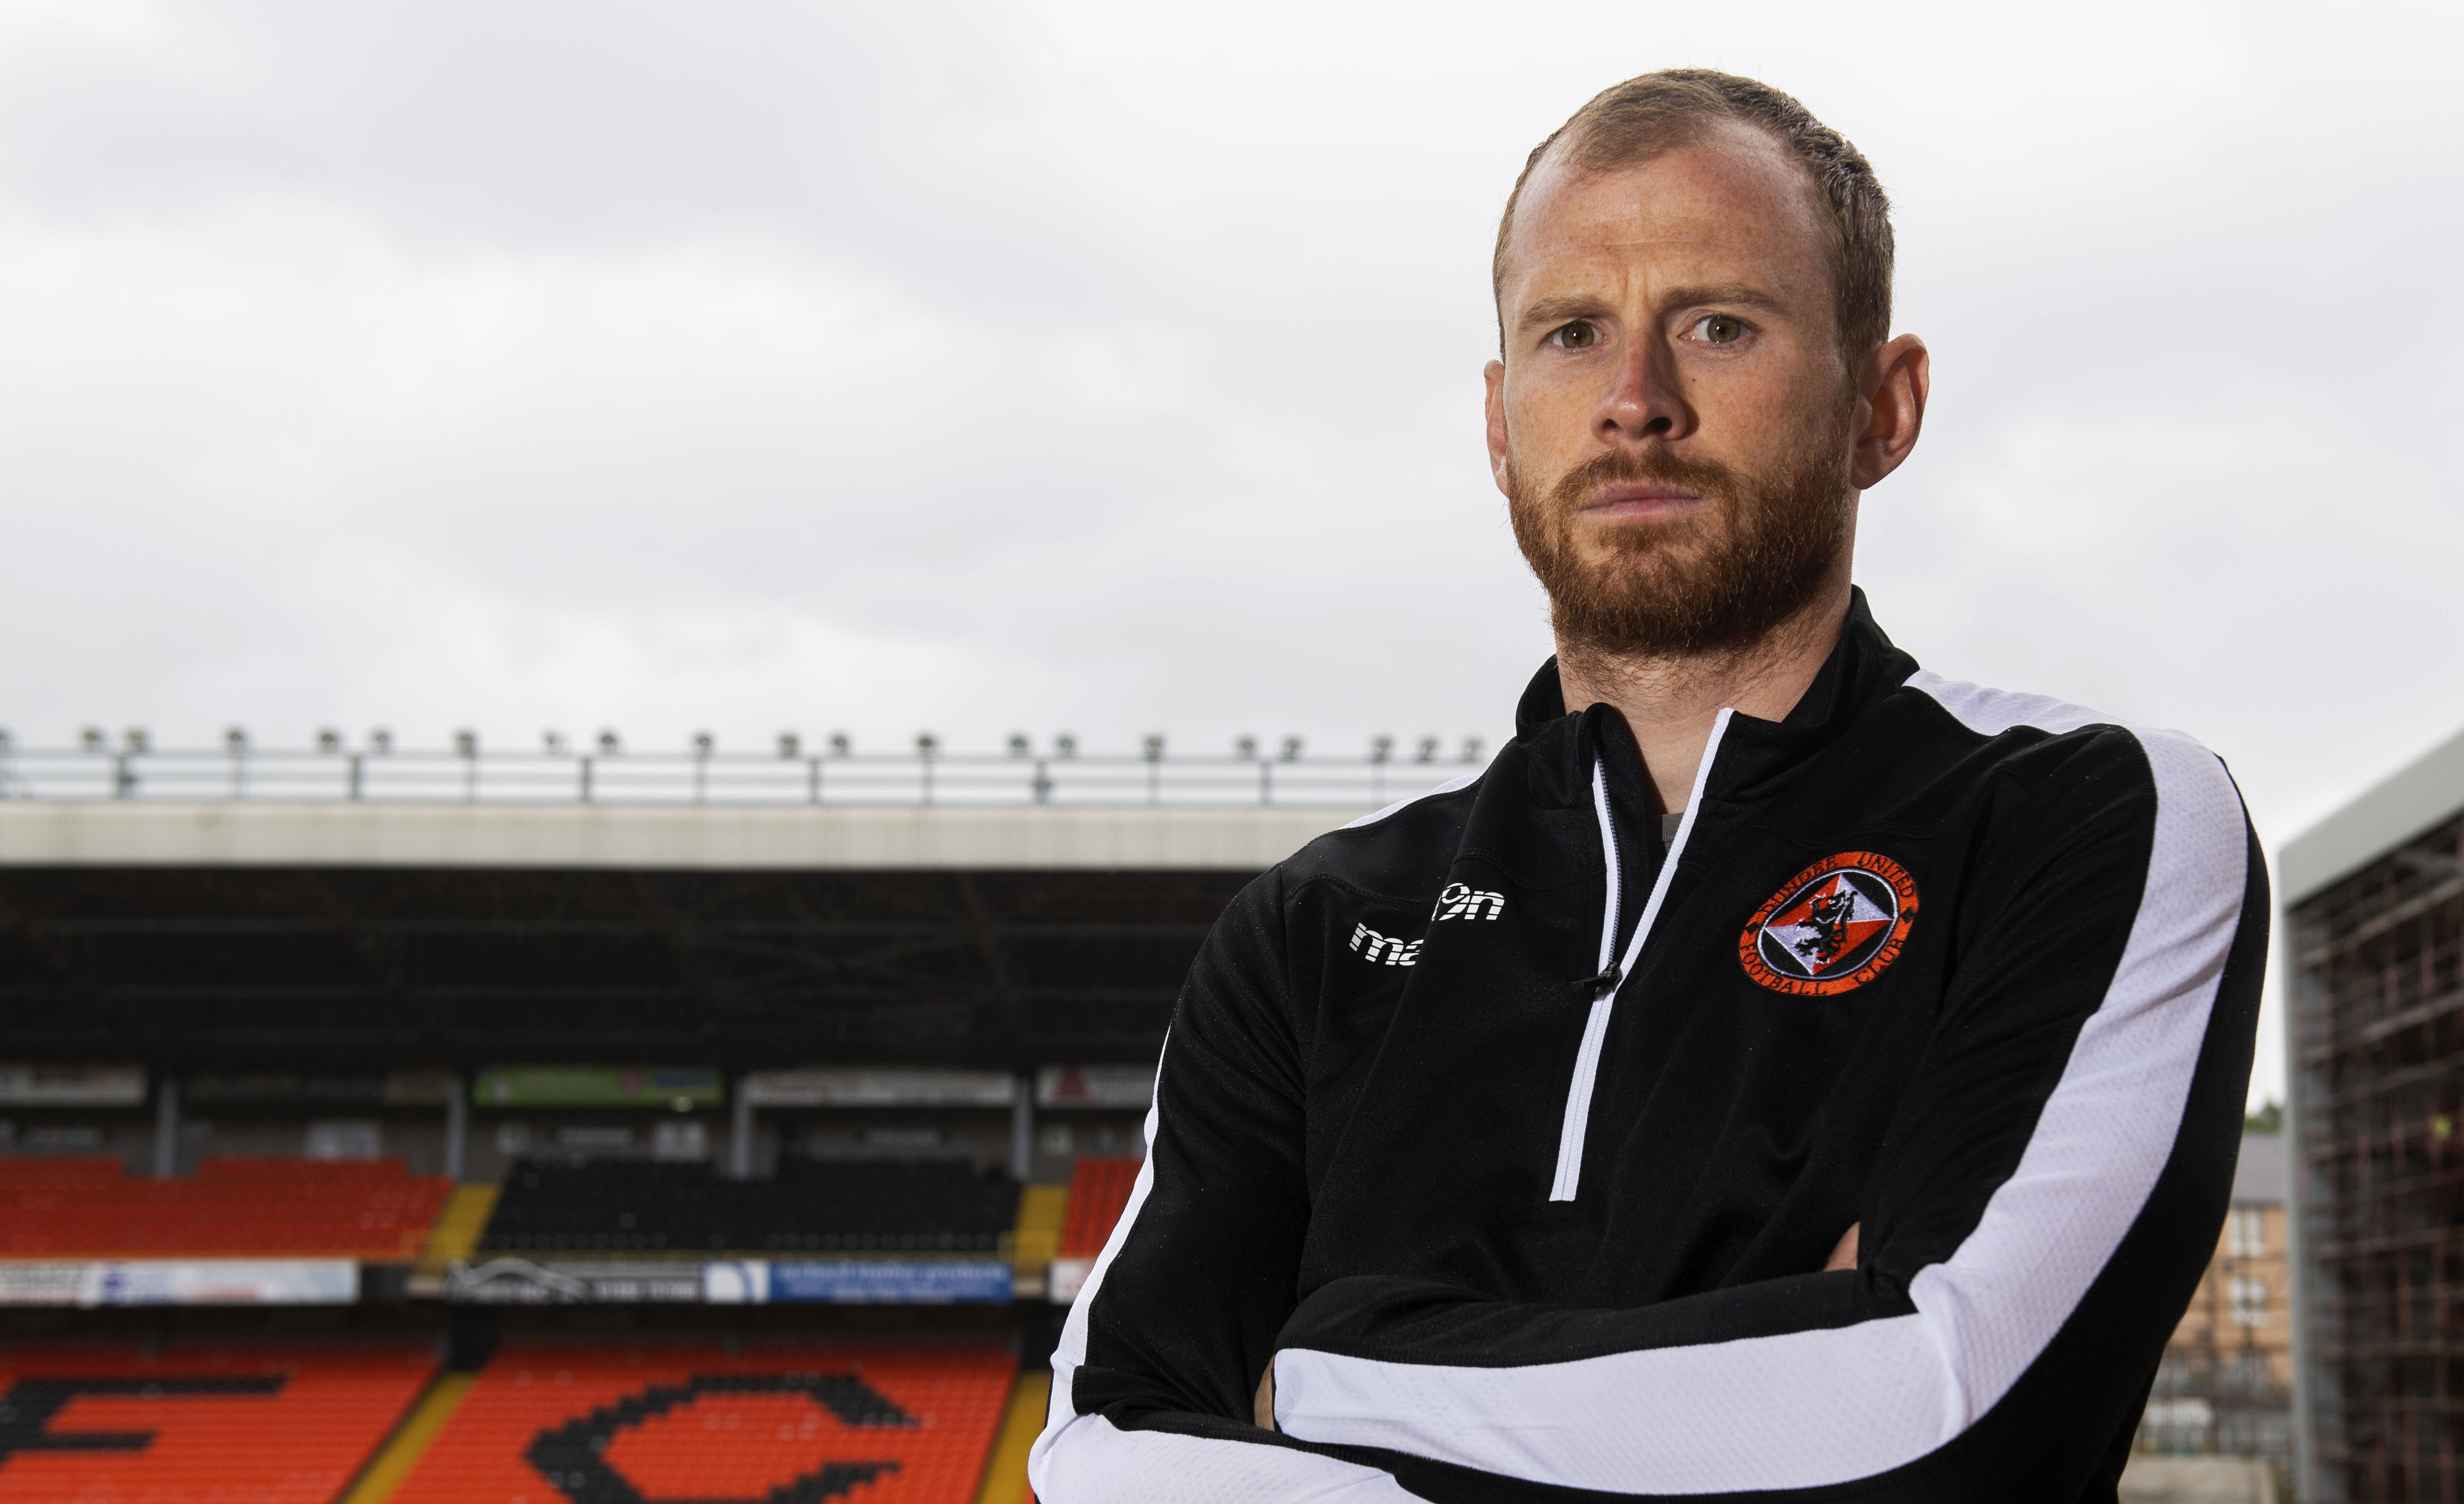 United skipper, Reynolds, wants give-and-take in reconstruction negotiations.